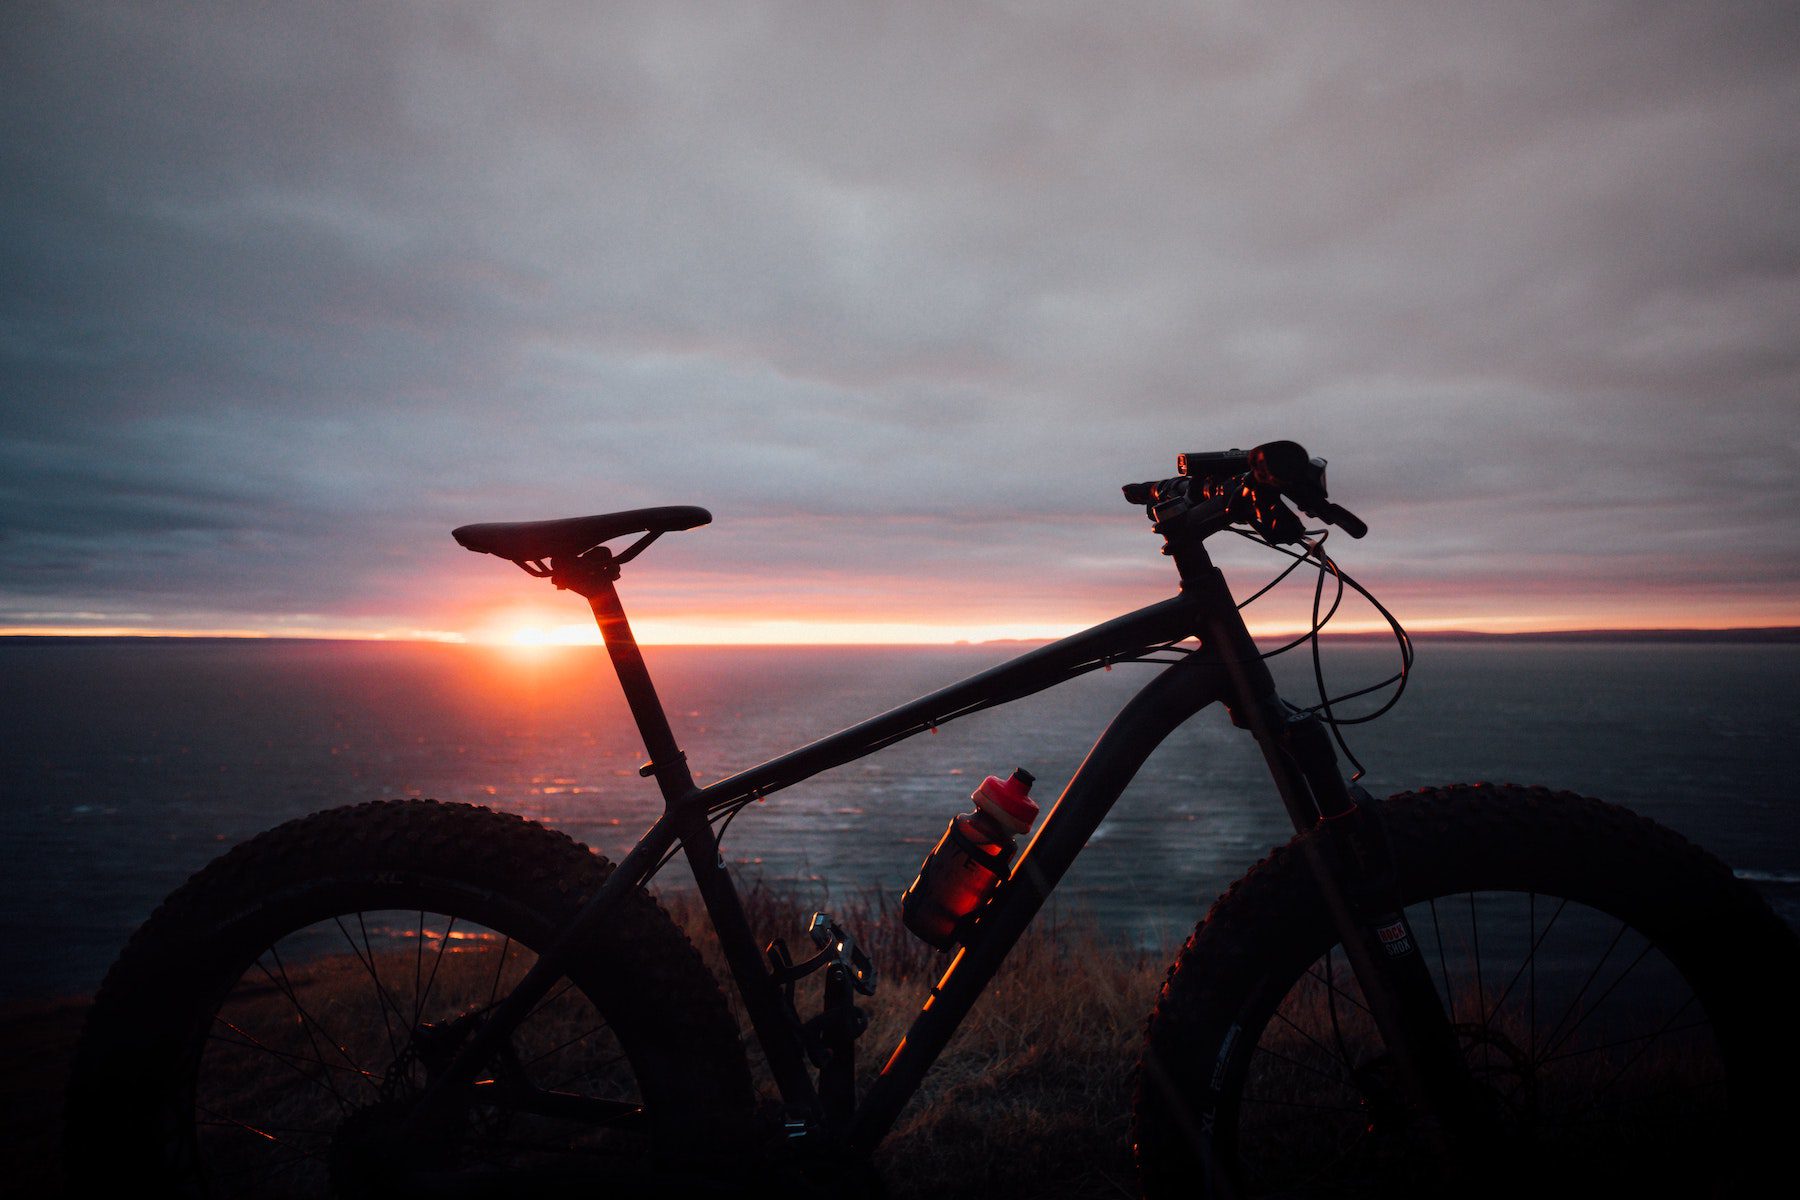 Silhouette of a bicycle against a pink and gray sunset atop a mountain.